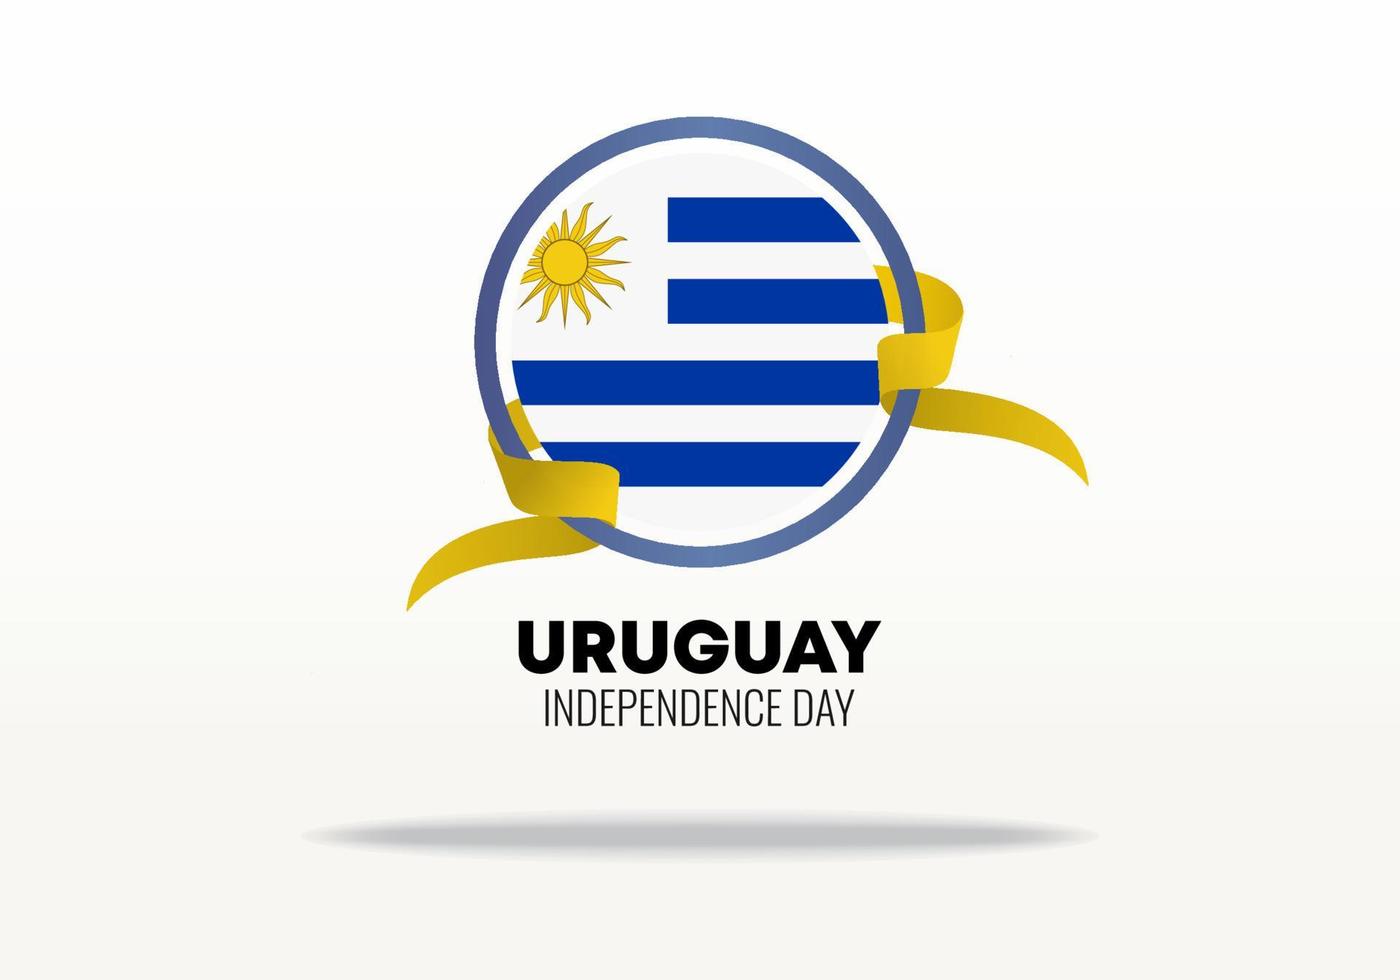 Uruguay independence day background for celebration on august 25. vector